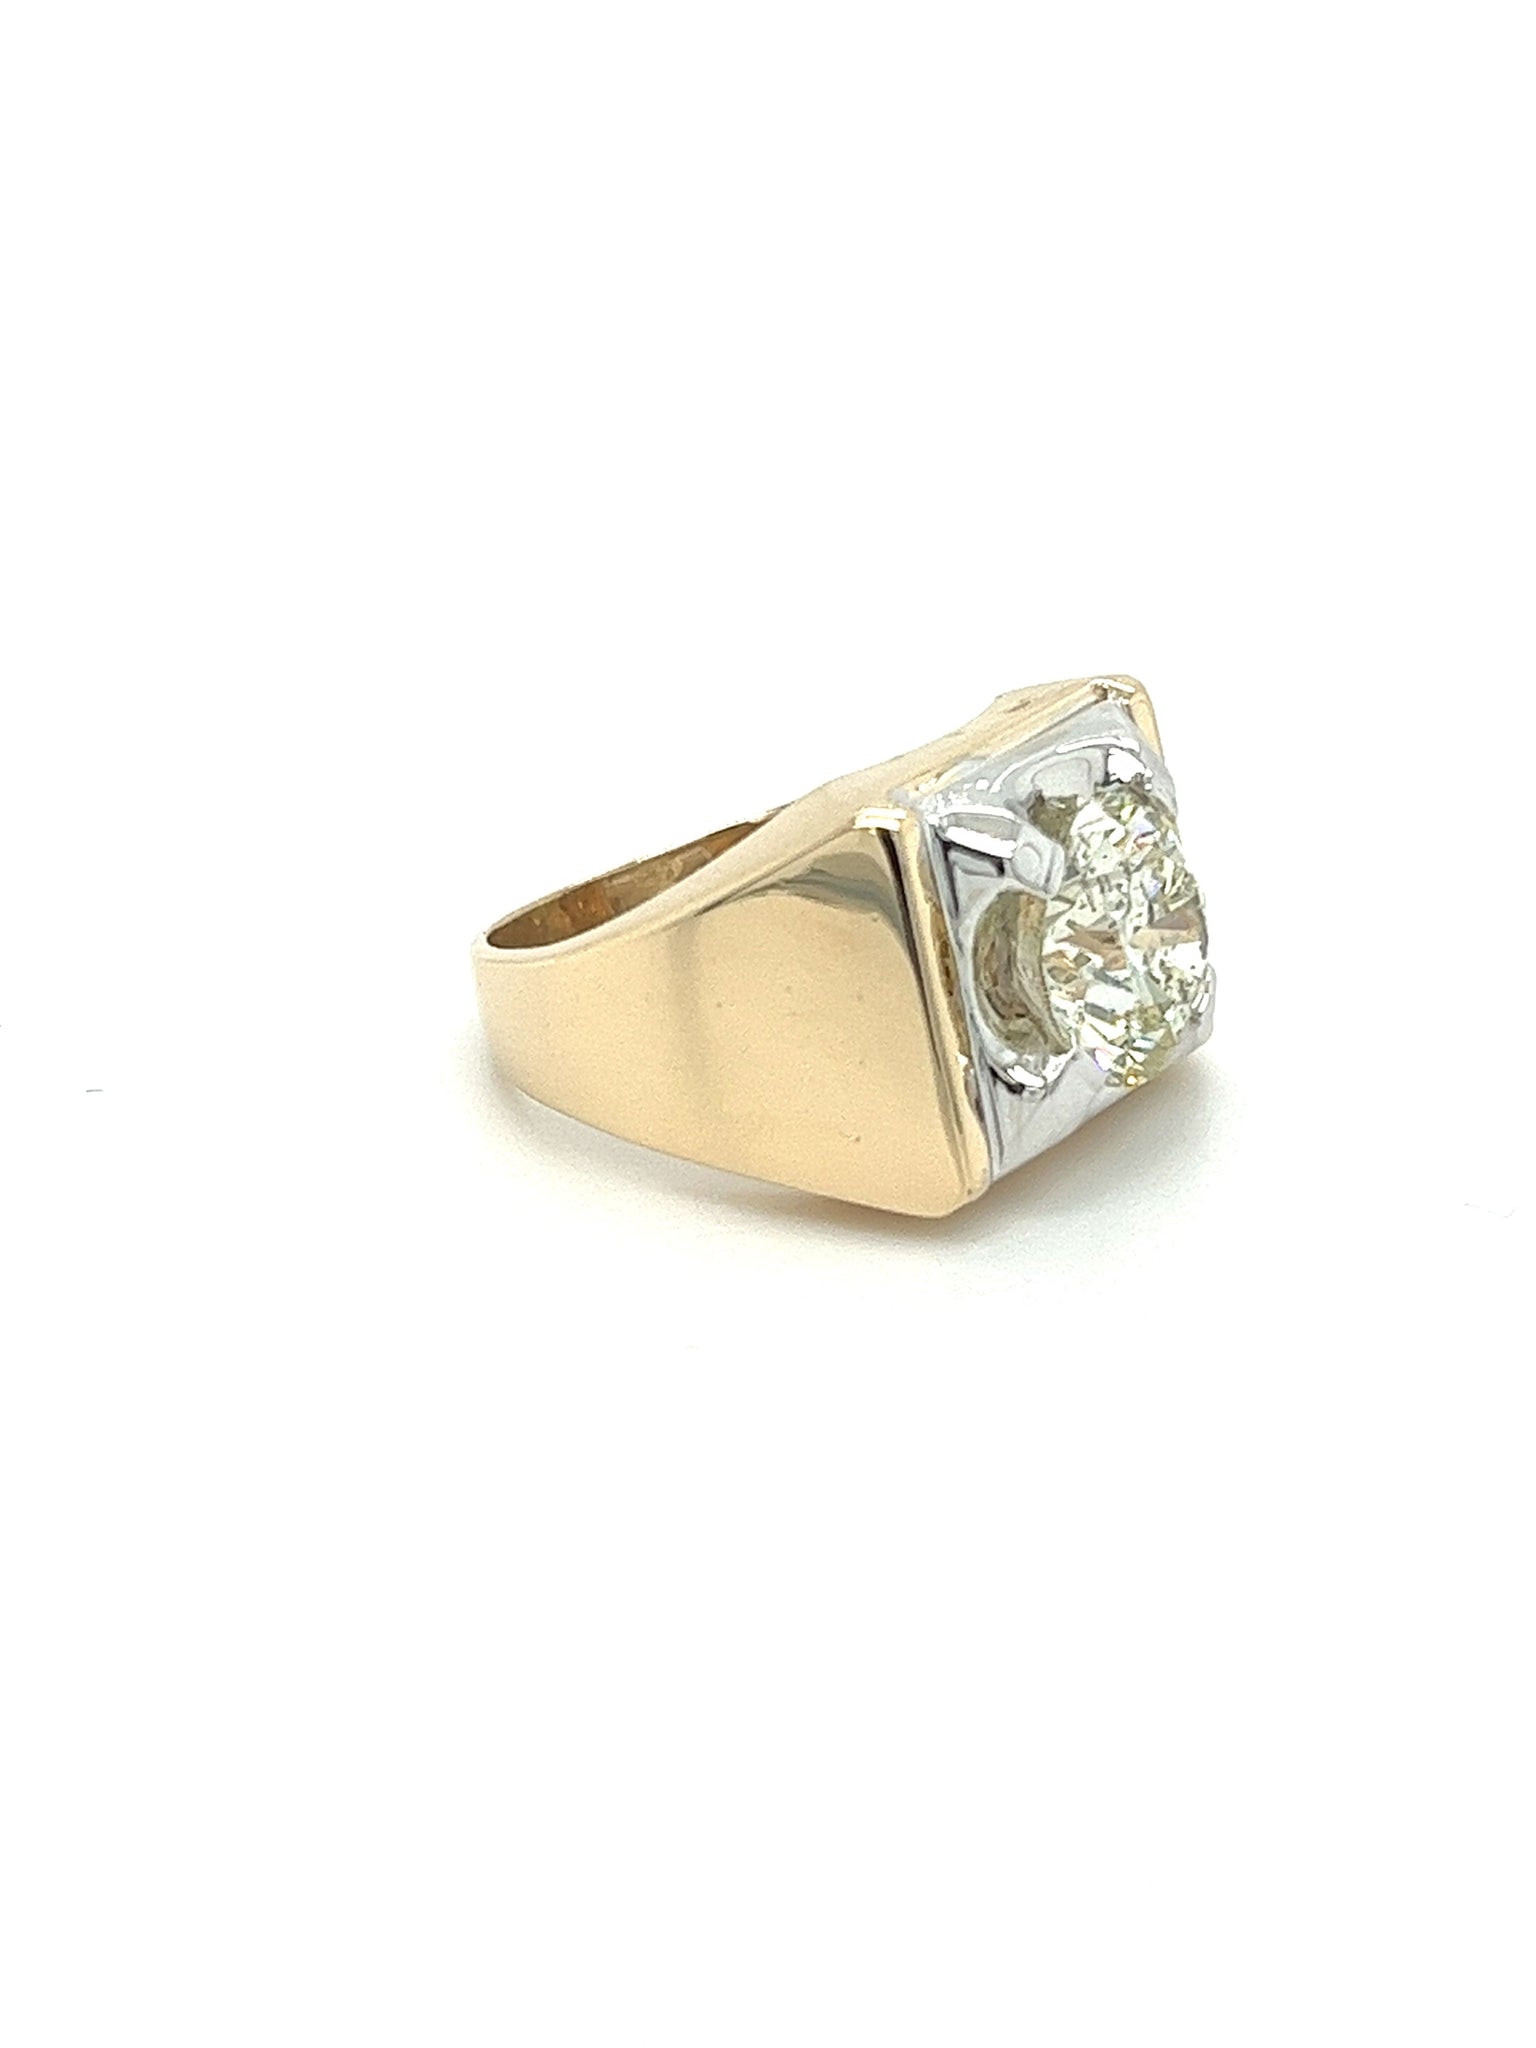 3 Carat Round Cut Natural Diamond Solitaire Mens Ring in 14K Solid Gold